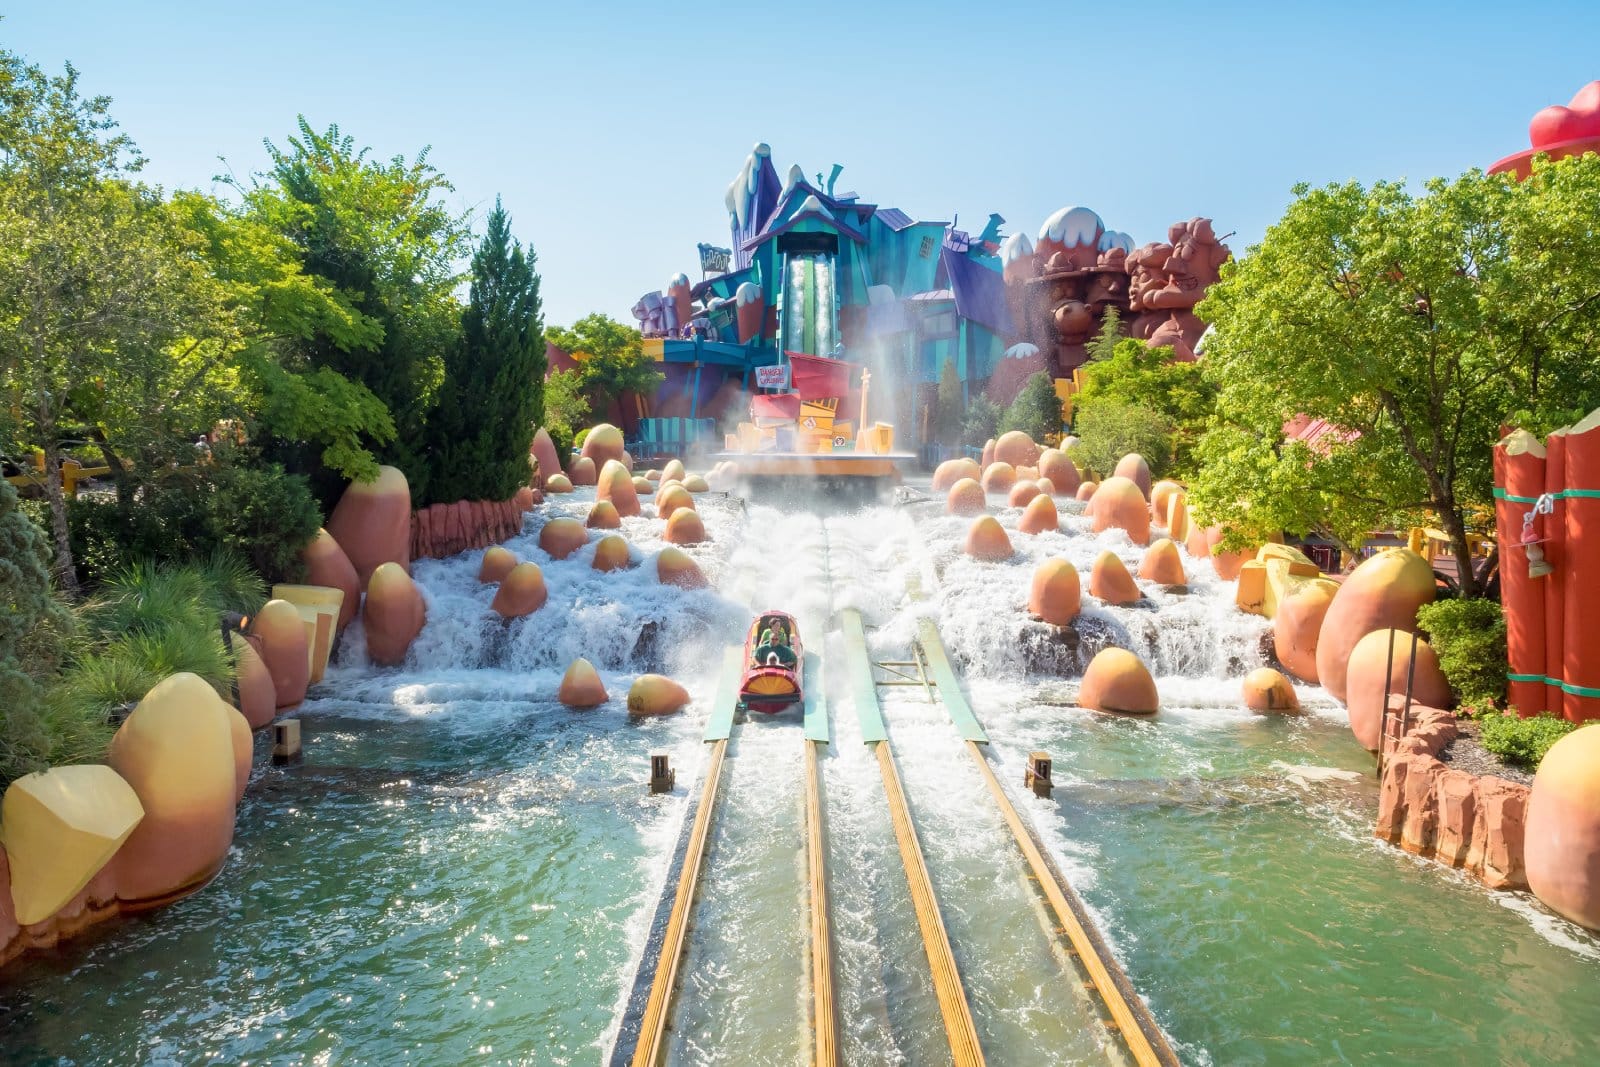 <p>Florida’s theme parks and beaches helped it rake in close to $90 billion in tourism revenue in 2019. A one-day pass to Disney World’s Magic Kingdom can cost over $100 per person.</p>